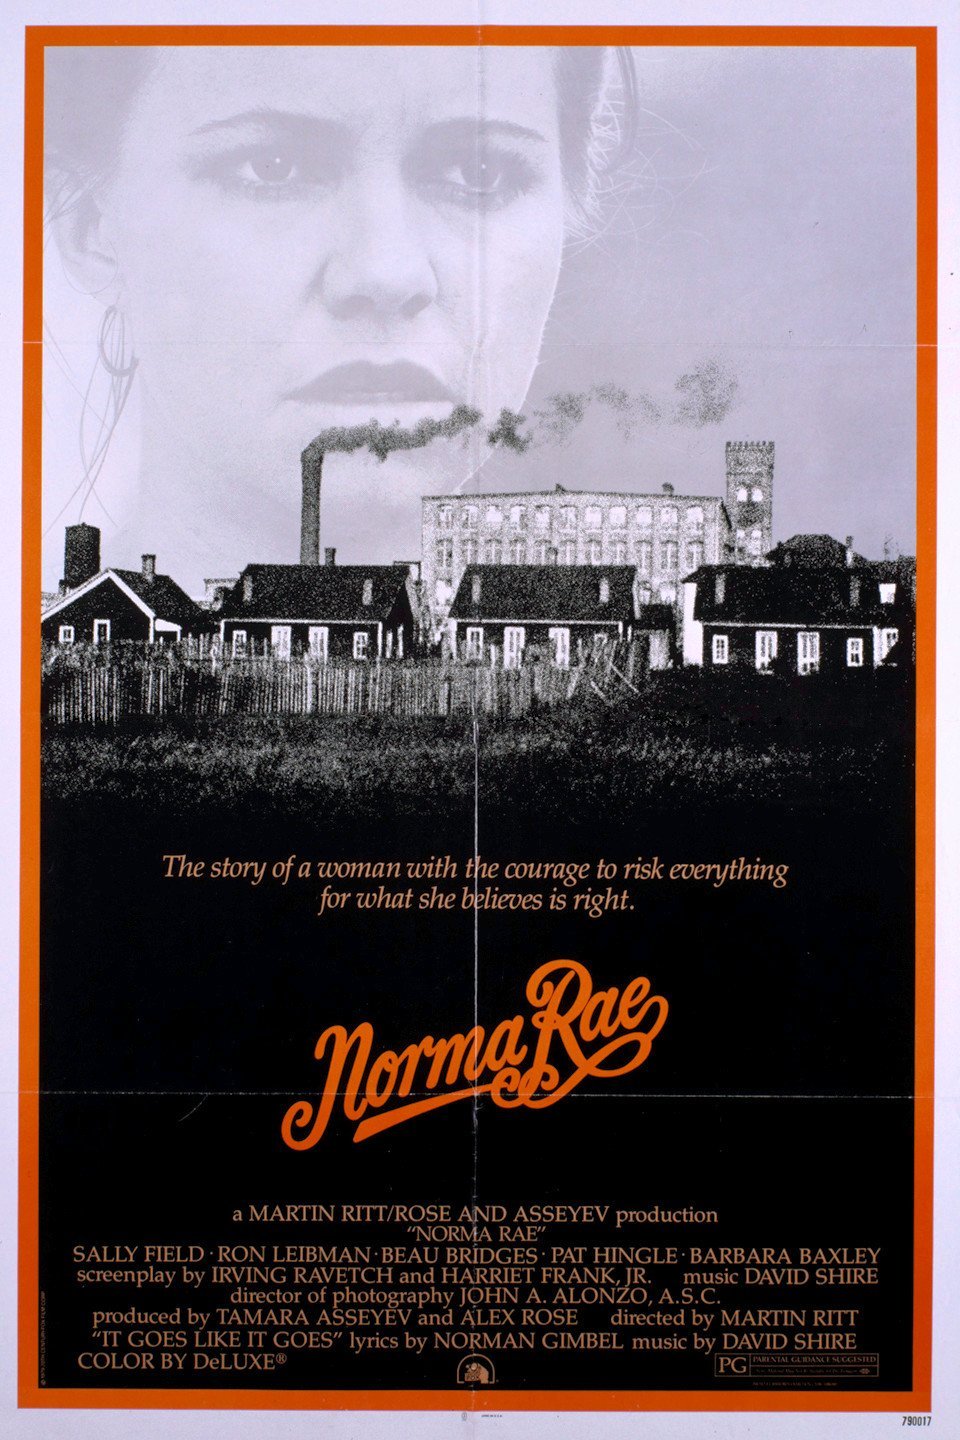 Poster of the movie Norma Rae